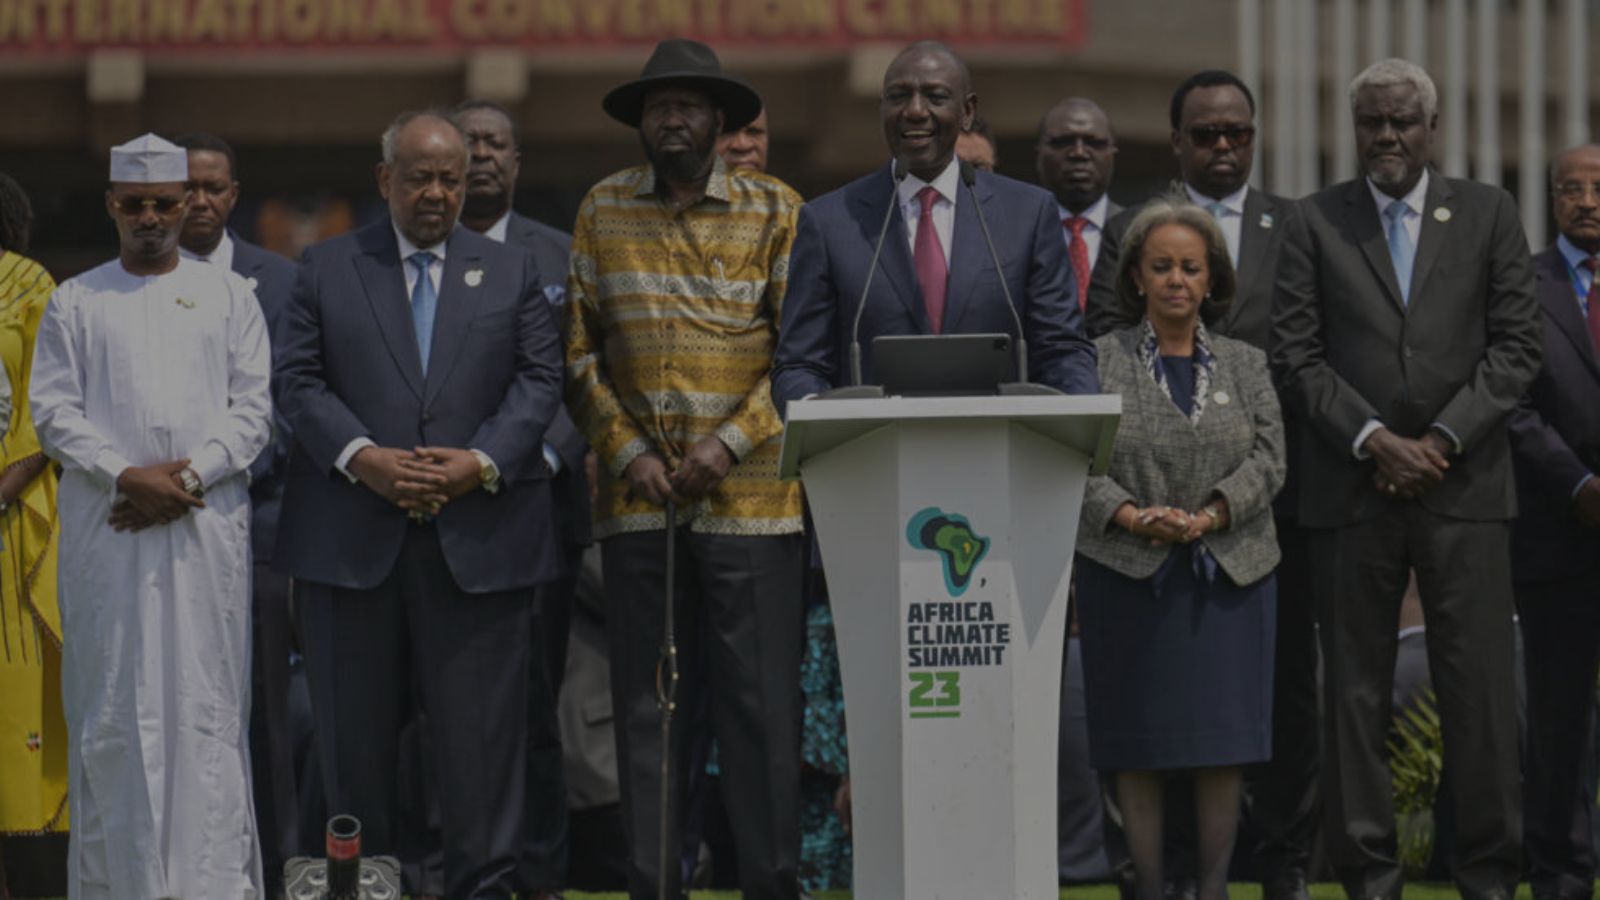 Nairobi Declaration: Africa’s Demands and Aspirations in the Climate Fight